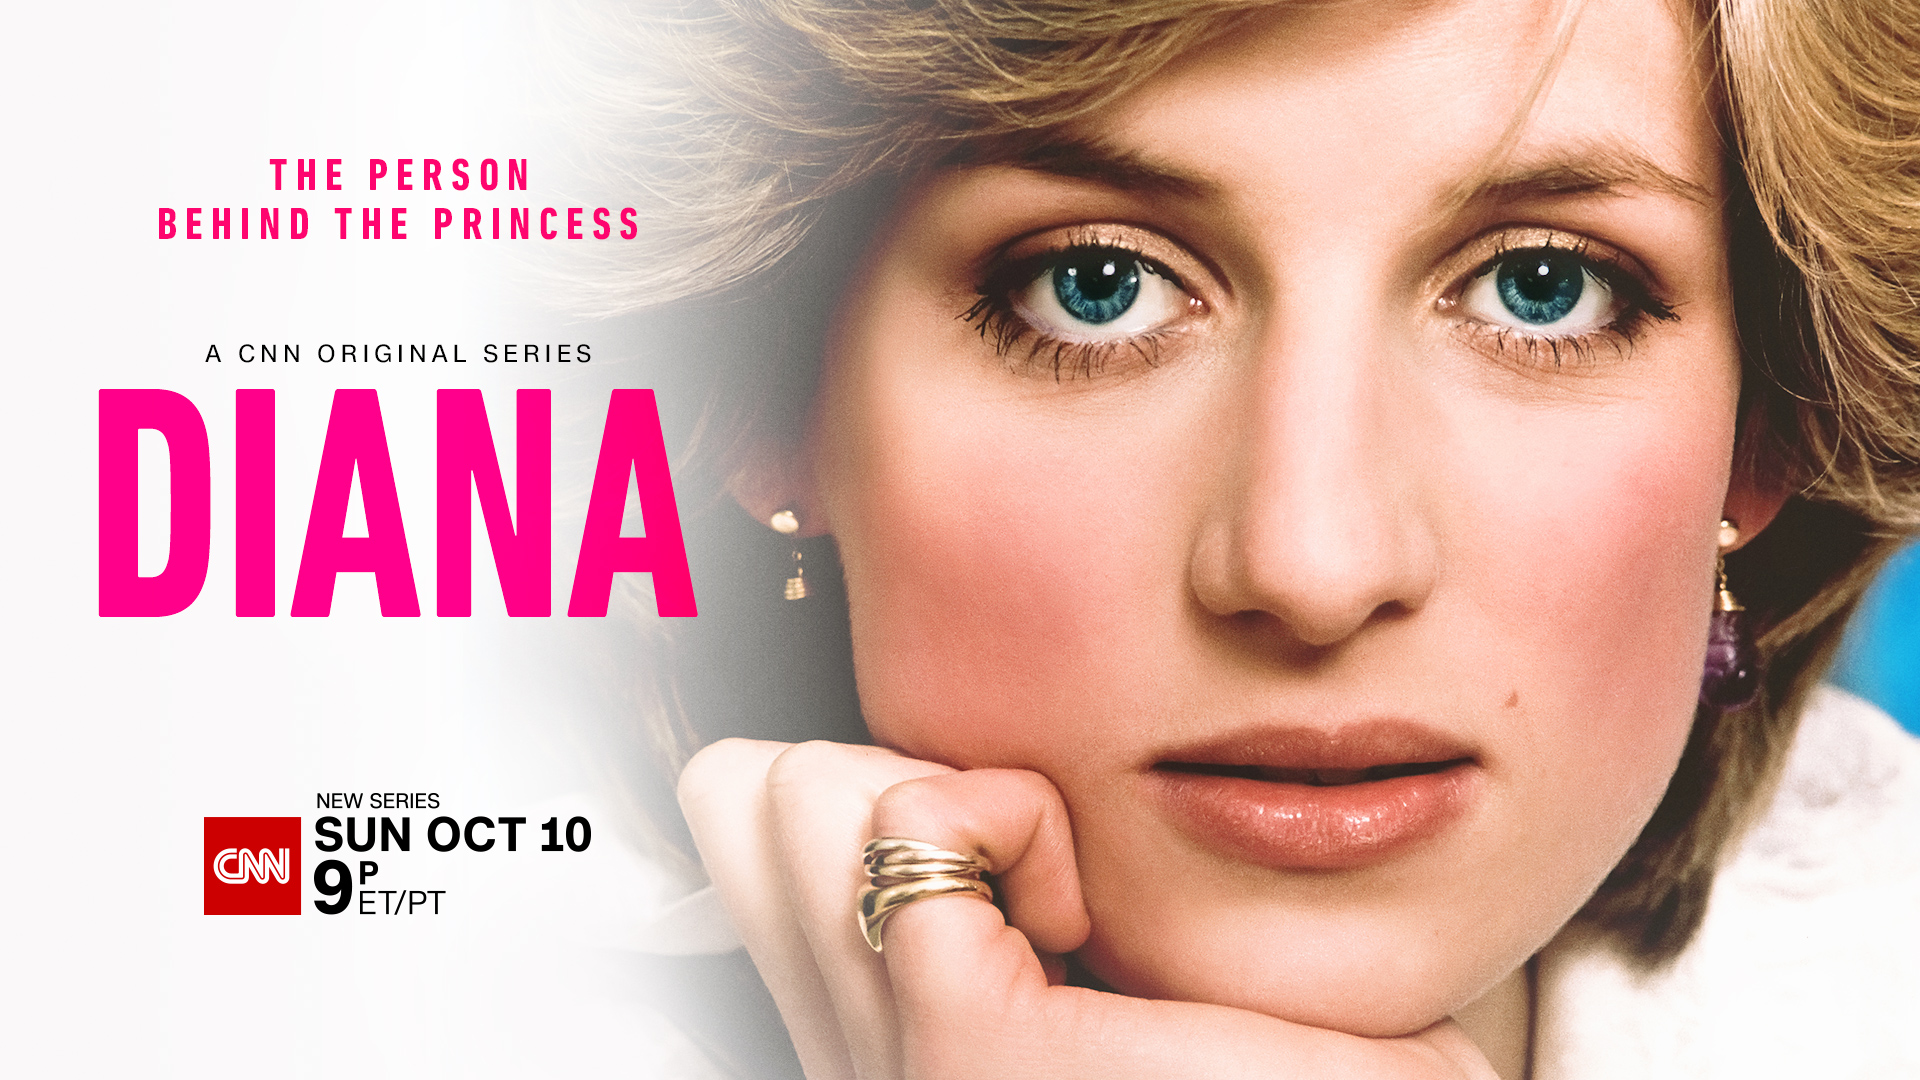 New CNN Original Series “Diana” and Season Eight of “This is Life